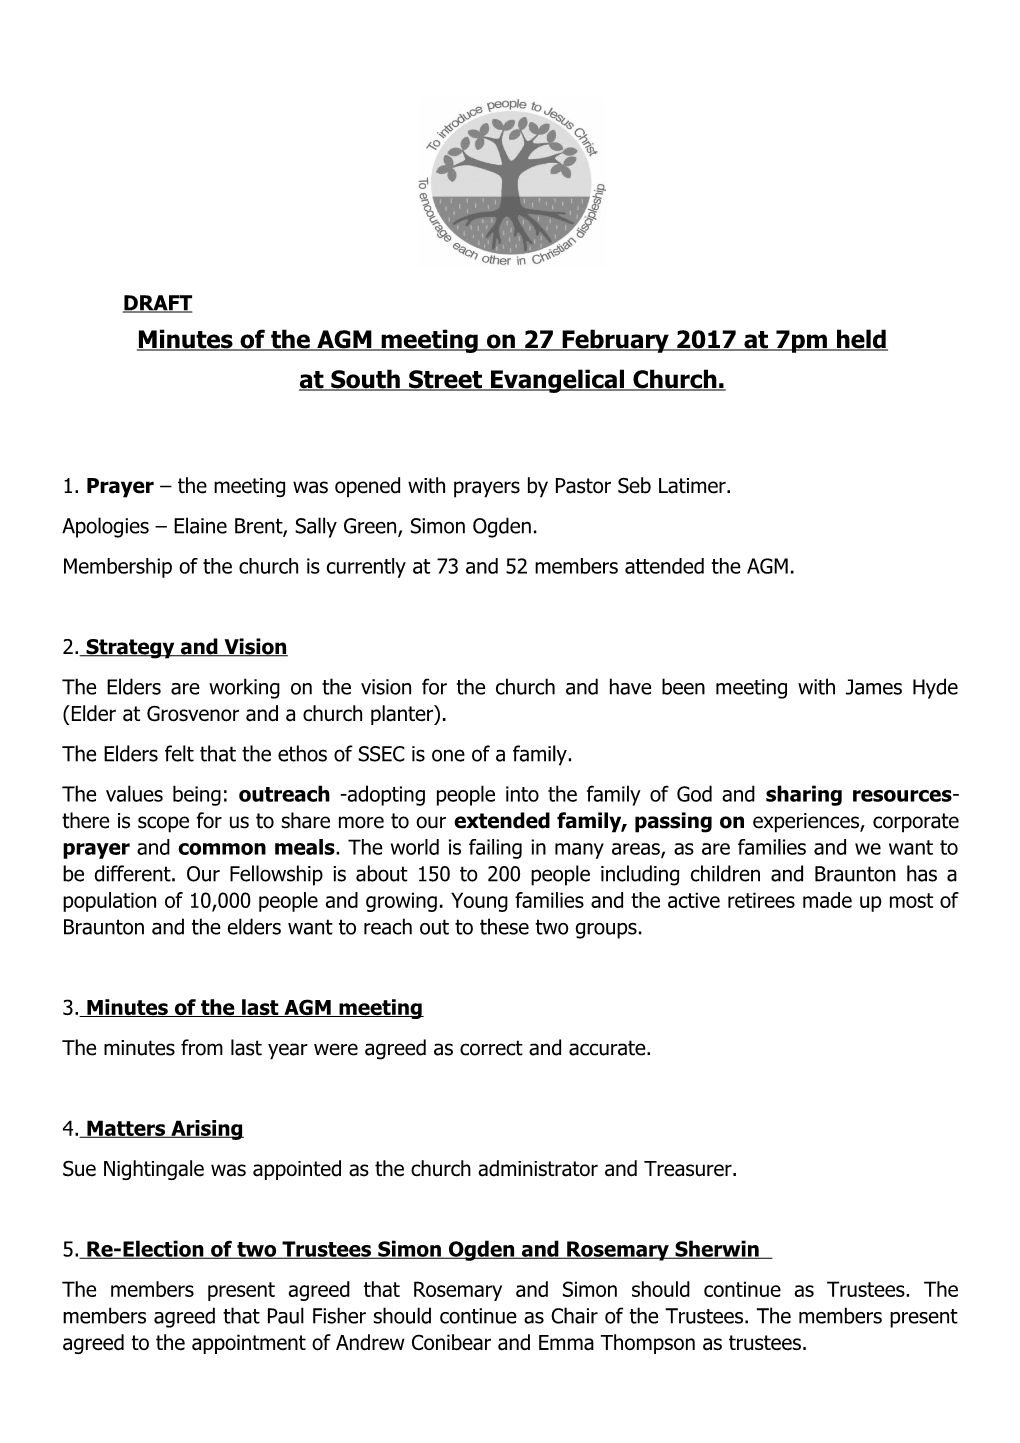 Minutes of the AGM Meeting on 27 February 2017 at 7Pm Held at South Street Evangelical Church